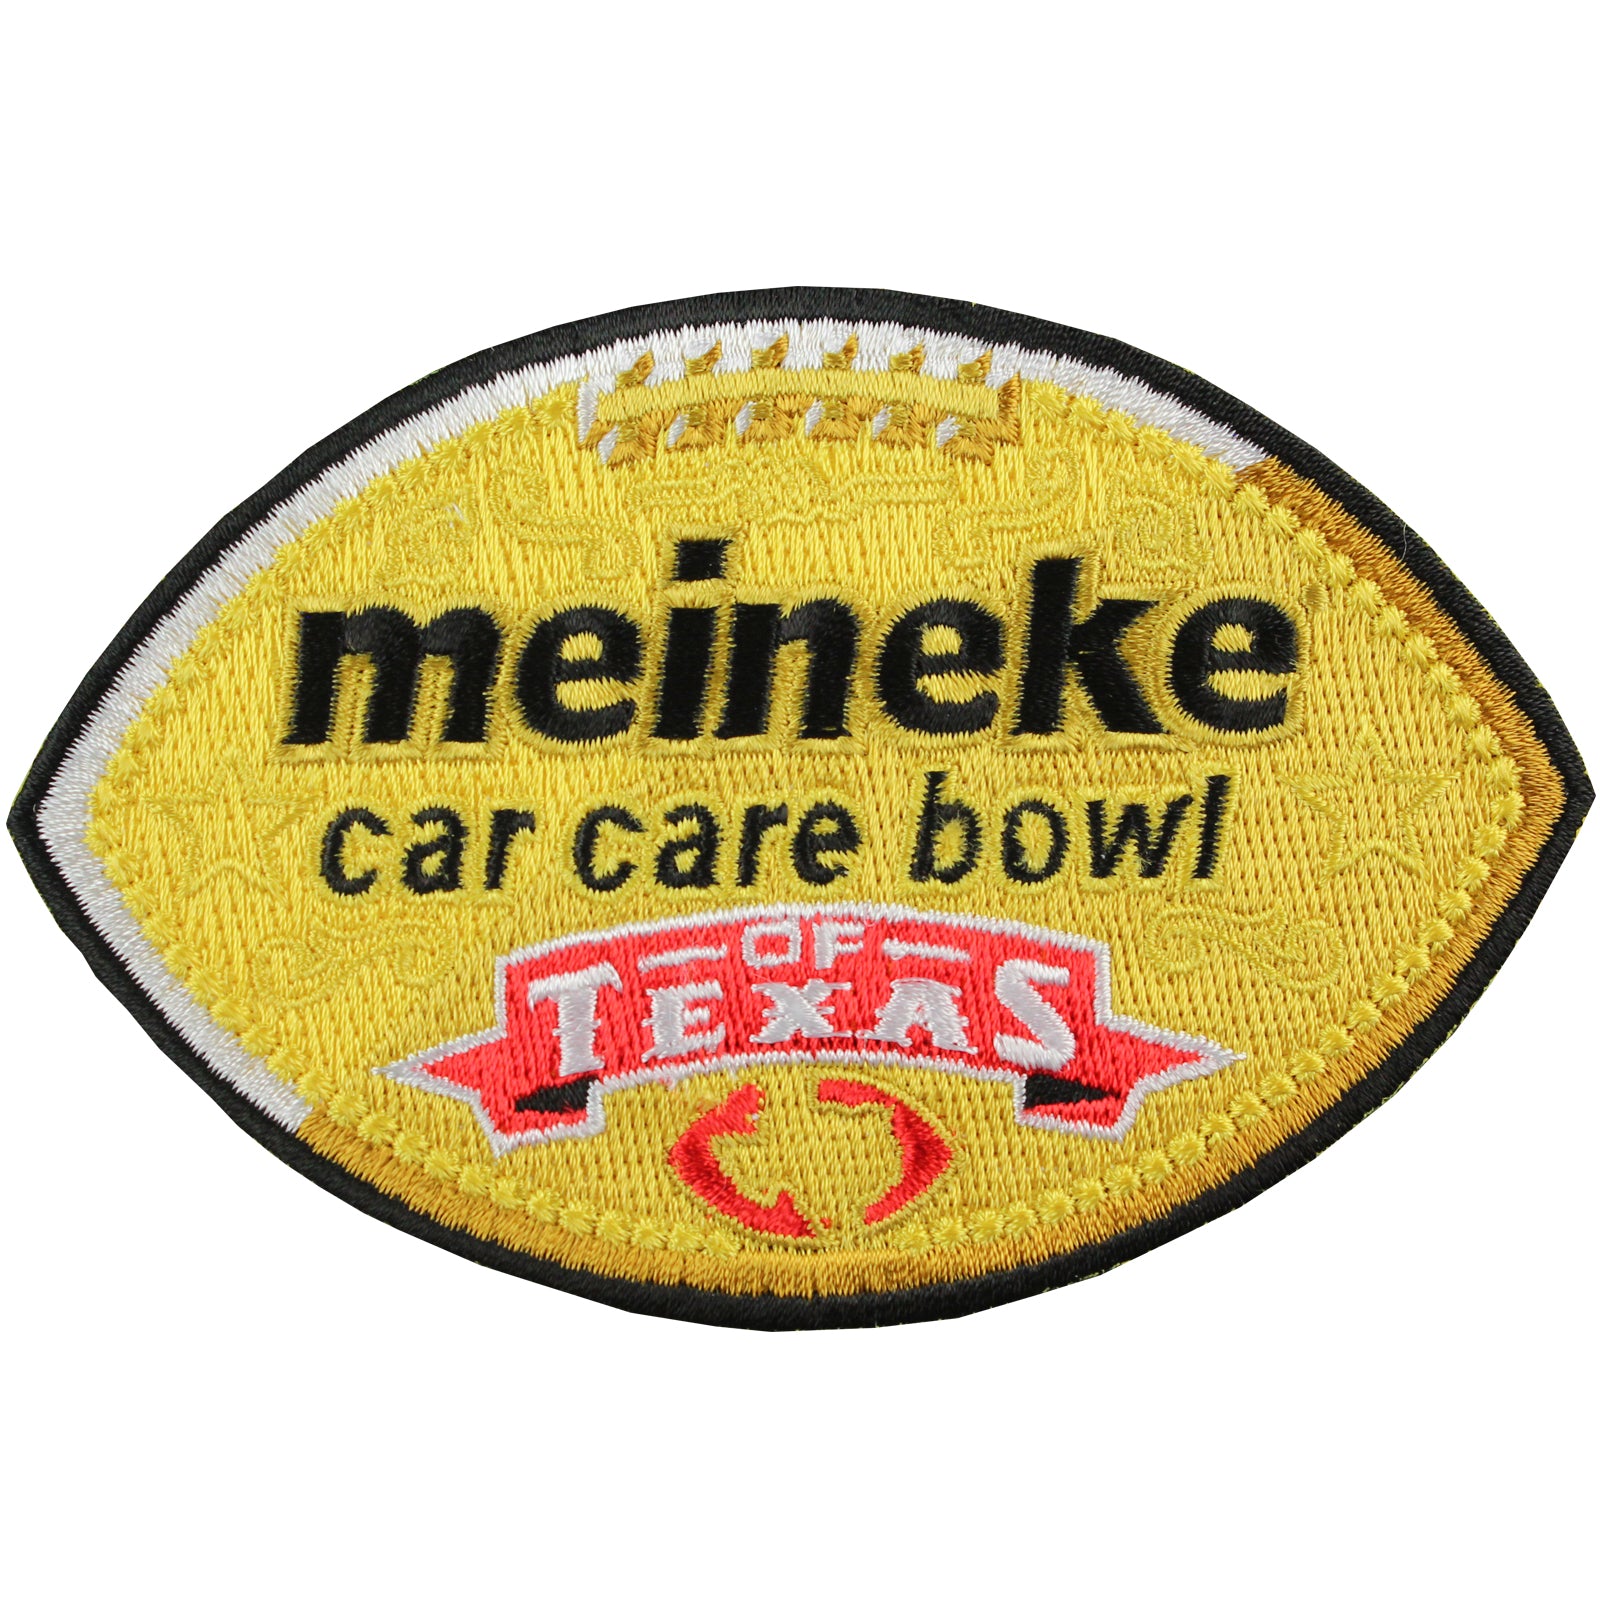 Meineke Car Care Texas Bowl Game Jersey Patch in Houston 